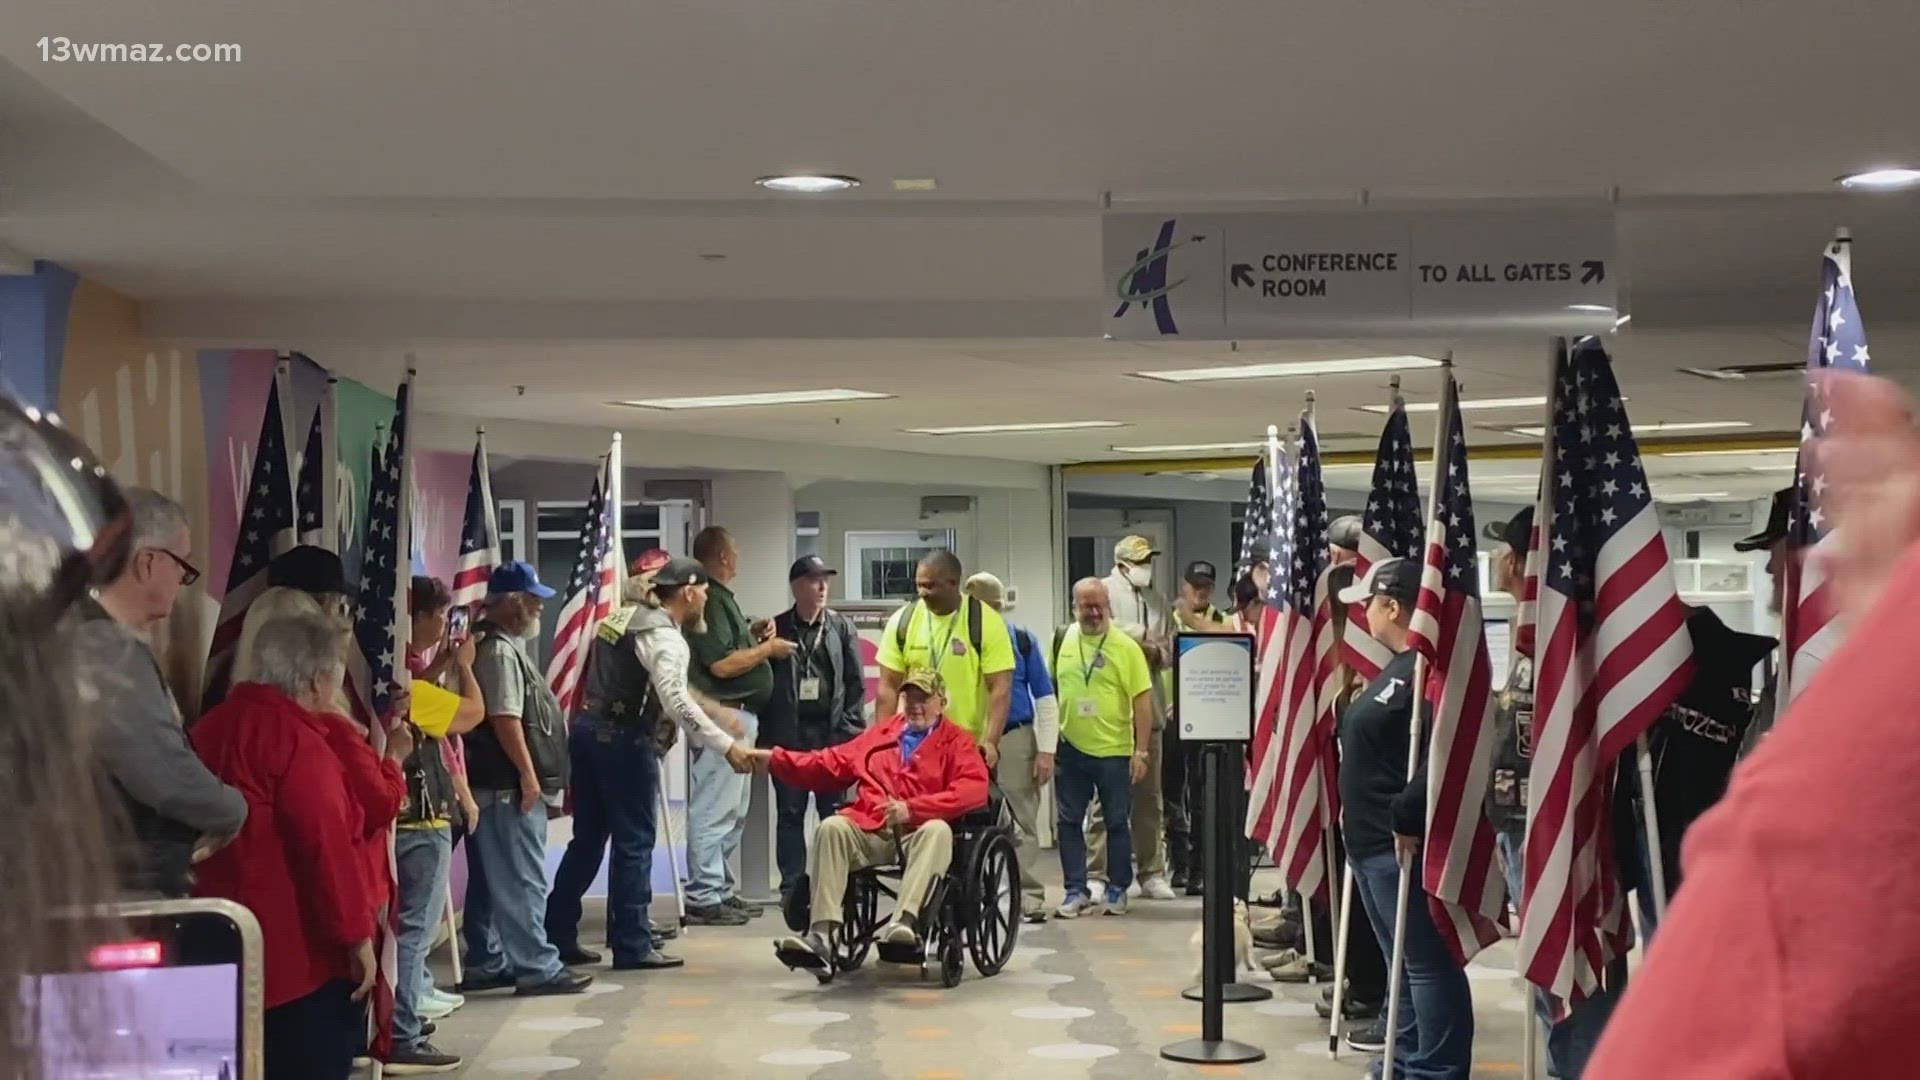 The honor flights, which takes Veterans to DC to go to the war memorials and recognize their service, returned to Macon Saturday after their visit.